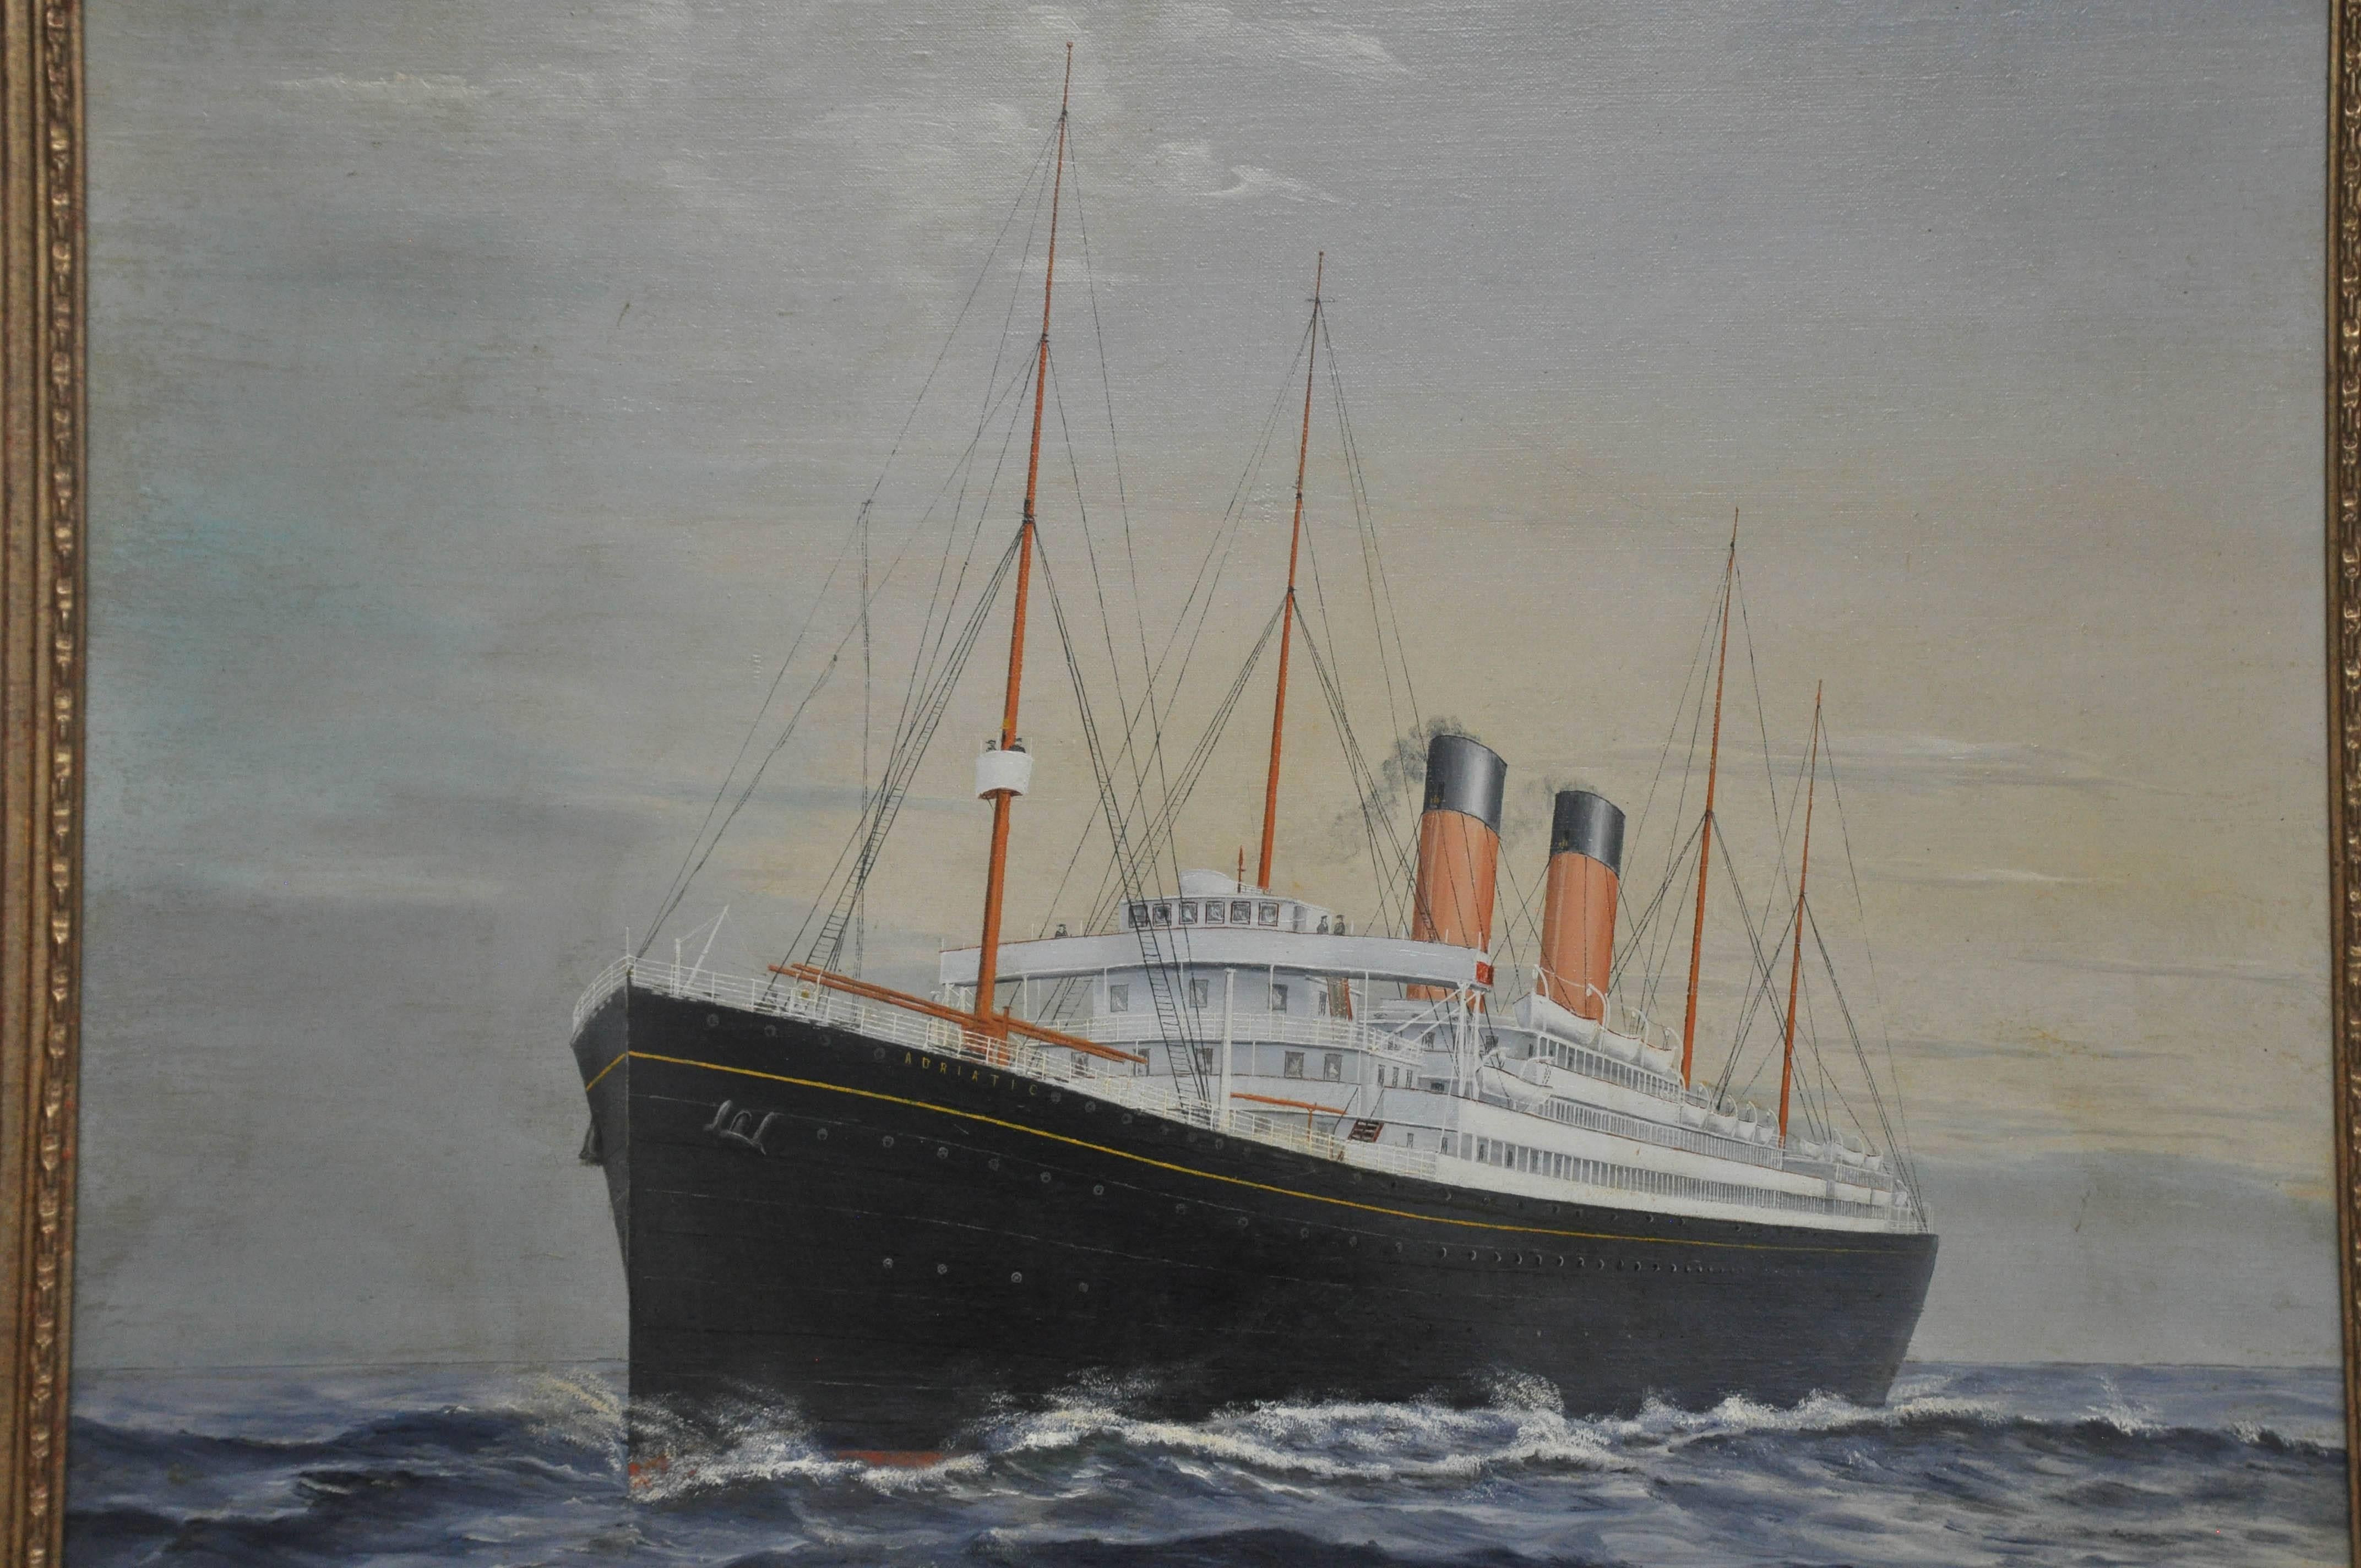 English Steamship portrait of the RMS Adriatic
Signed by E. Johnston, C-1915
31